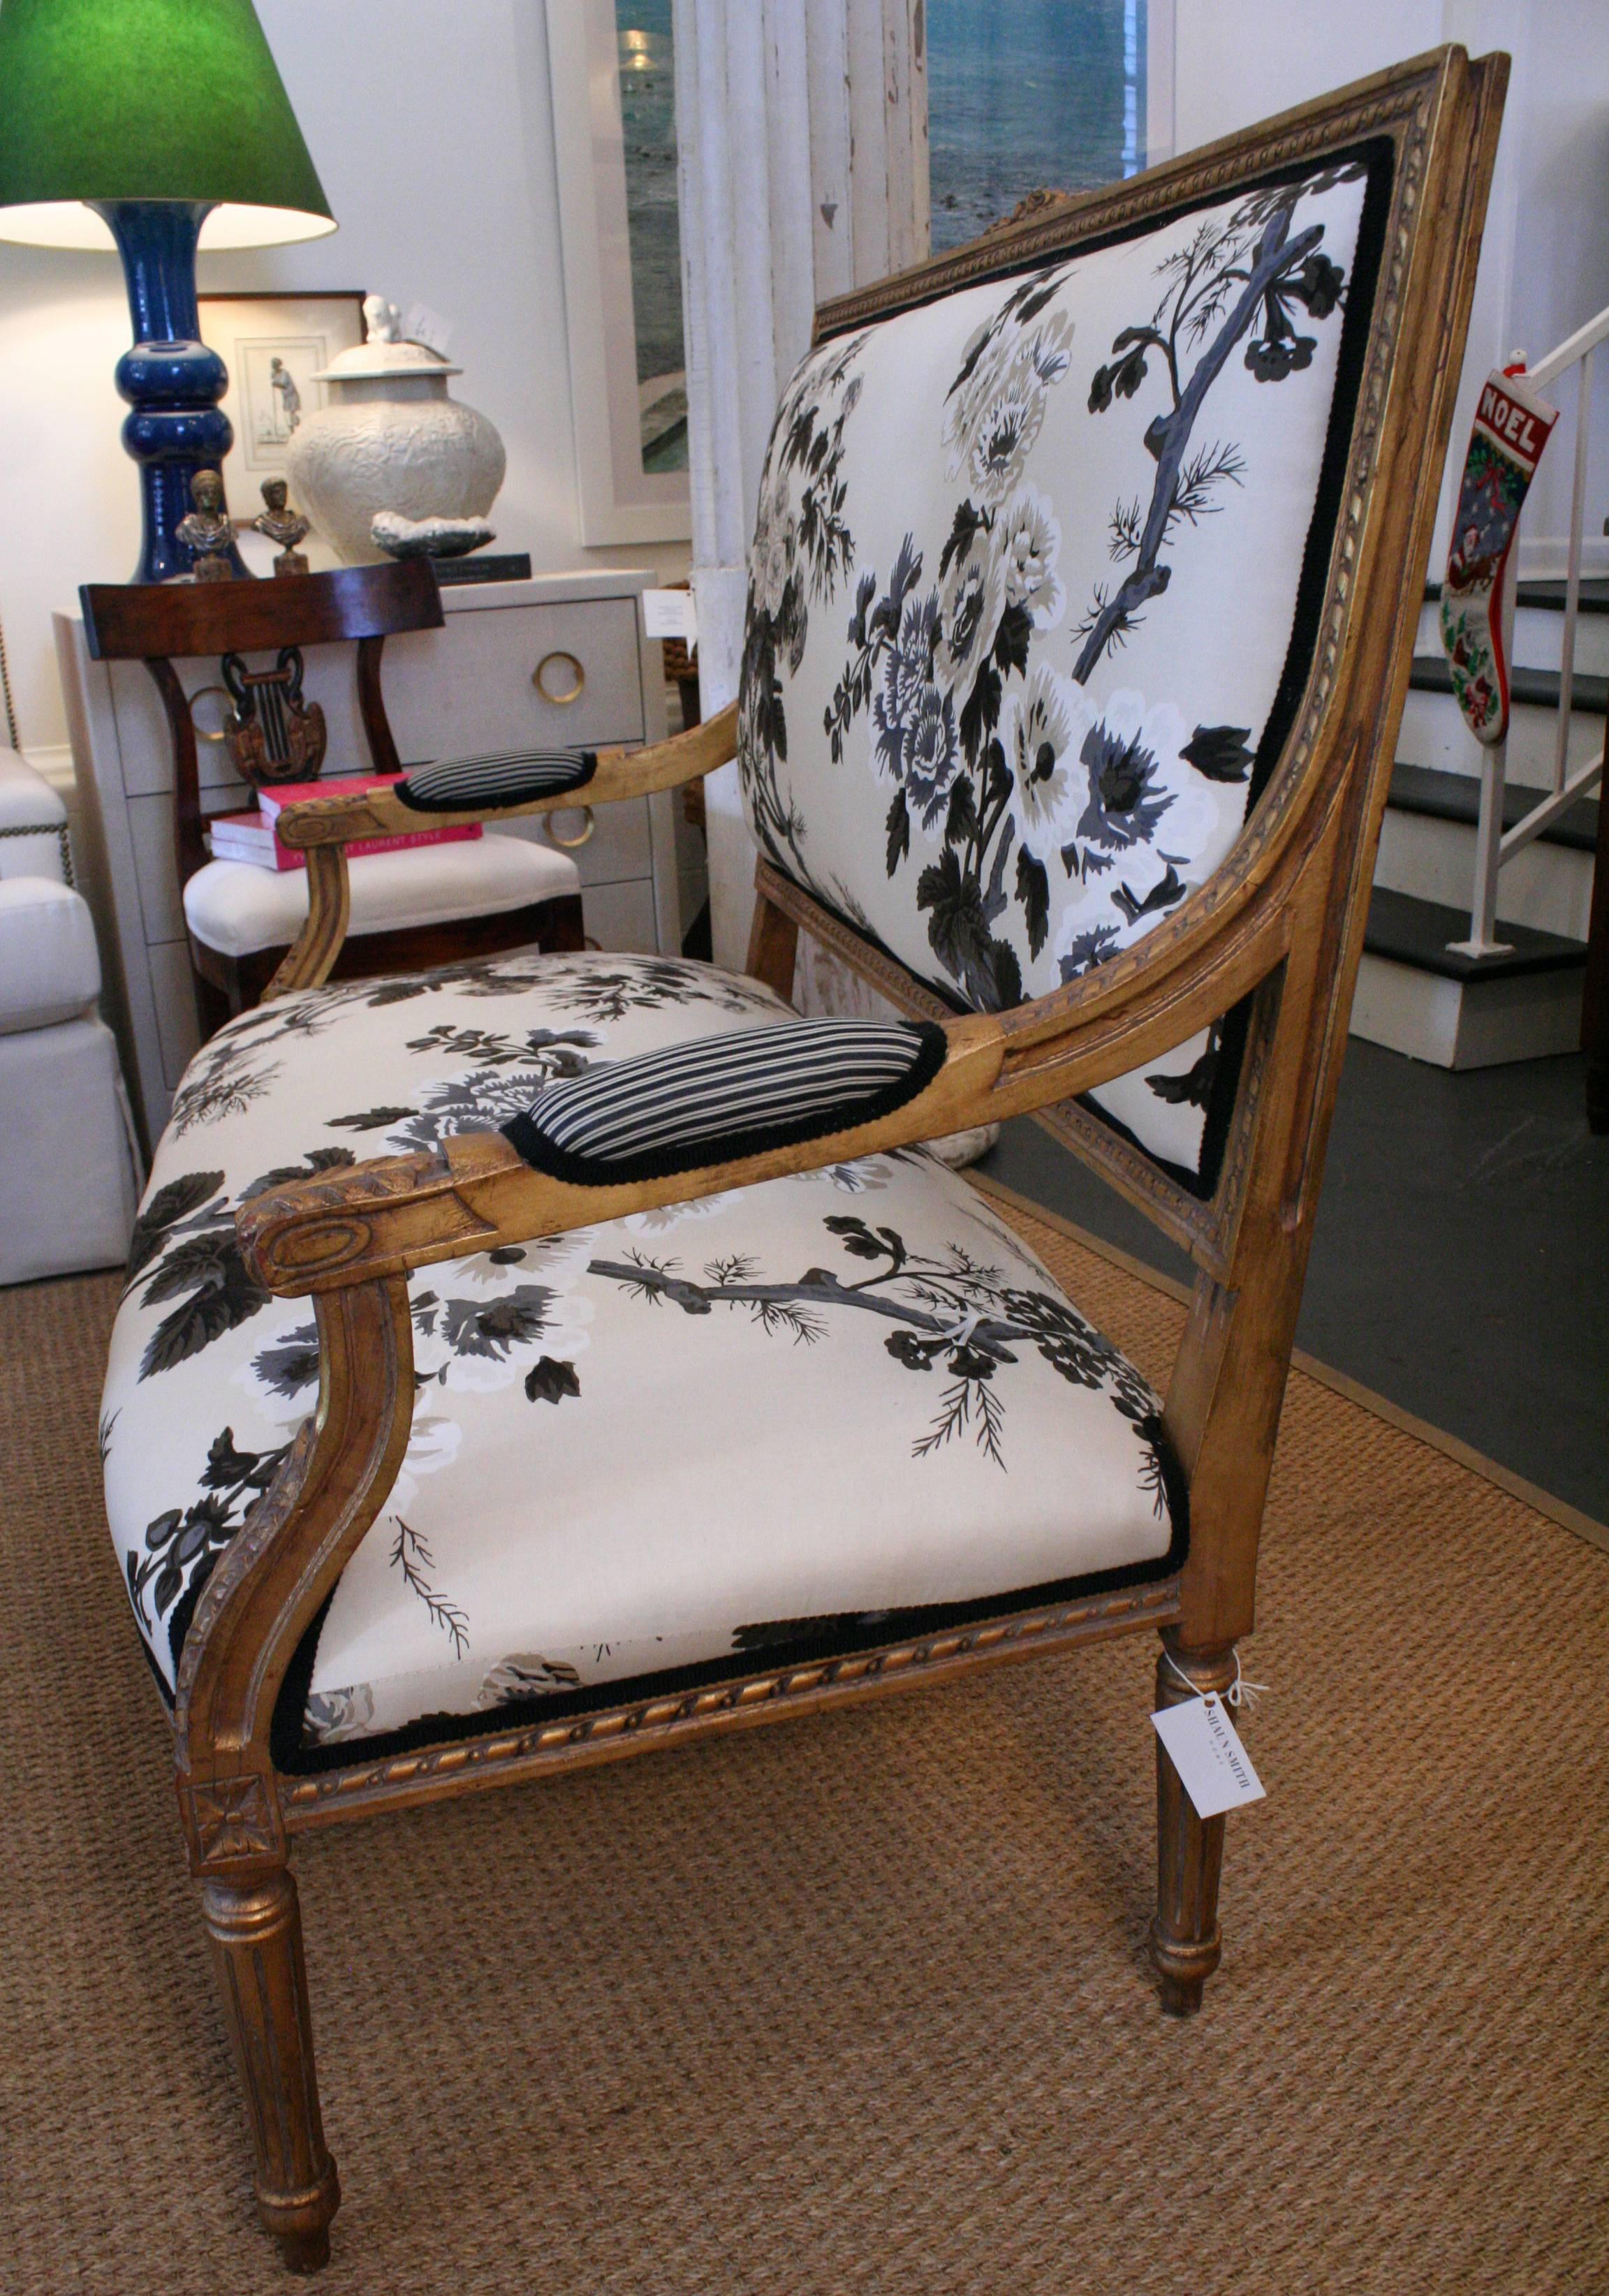 18th century Louis XVI style giltwood settee. Reupholstered in floral cotton fabric by Schumacher. Back is upholstered in striped cotton fabric by Scalamandre.